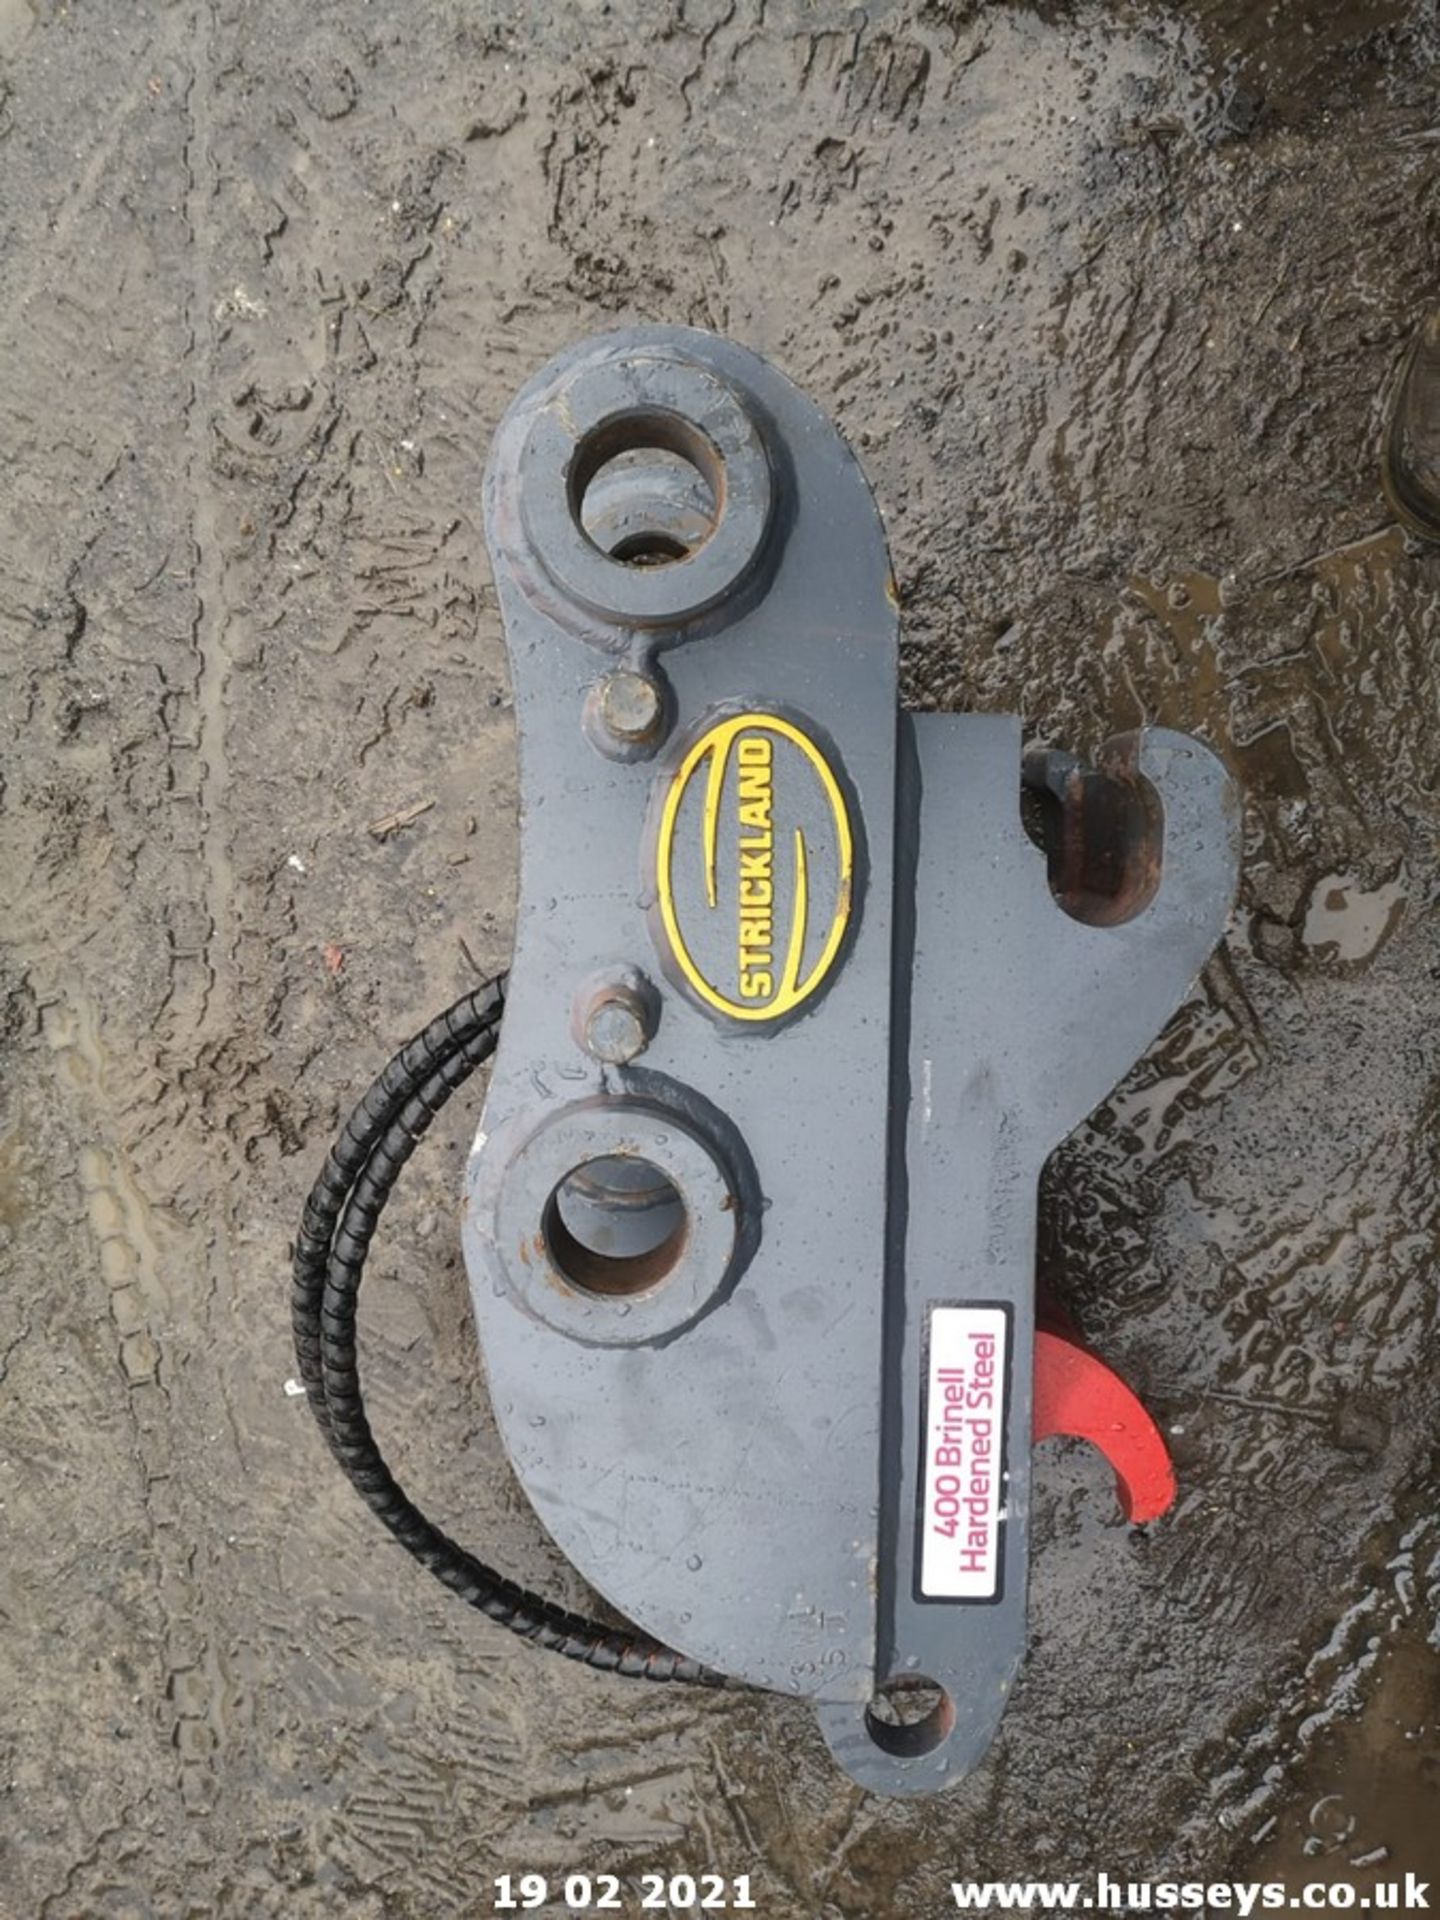 STRICKLAND HYDRAULIC HITCH FOR 8 TON DIGGER UNUSED - Image 3 of 4